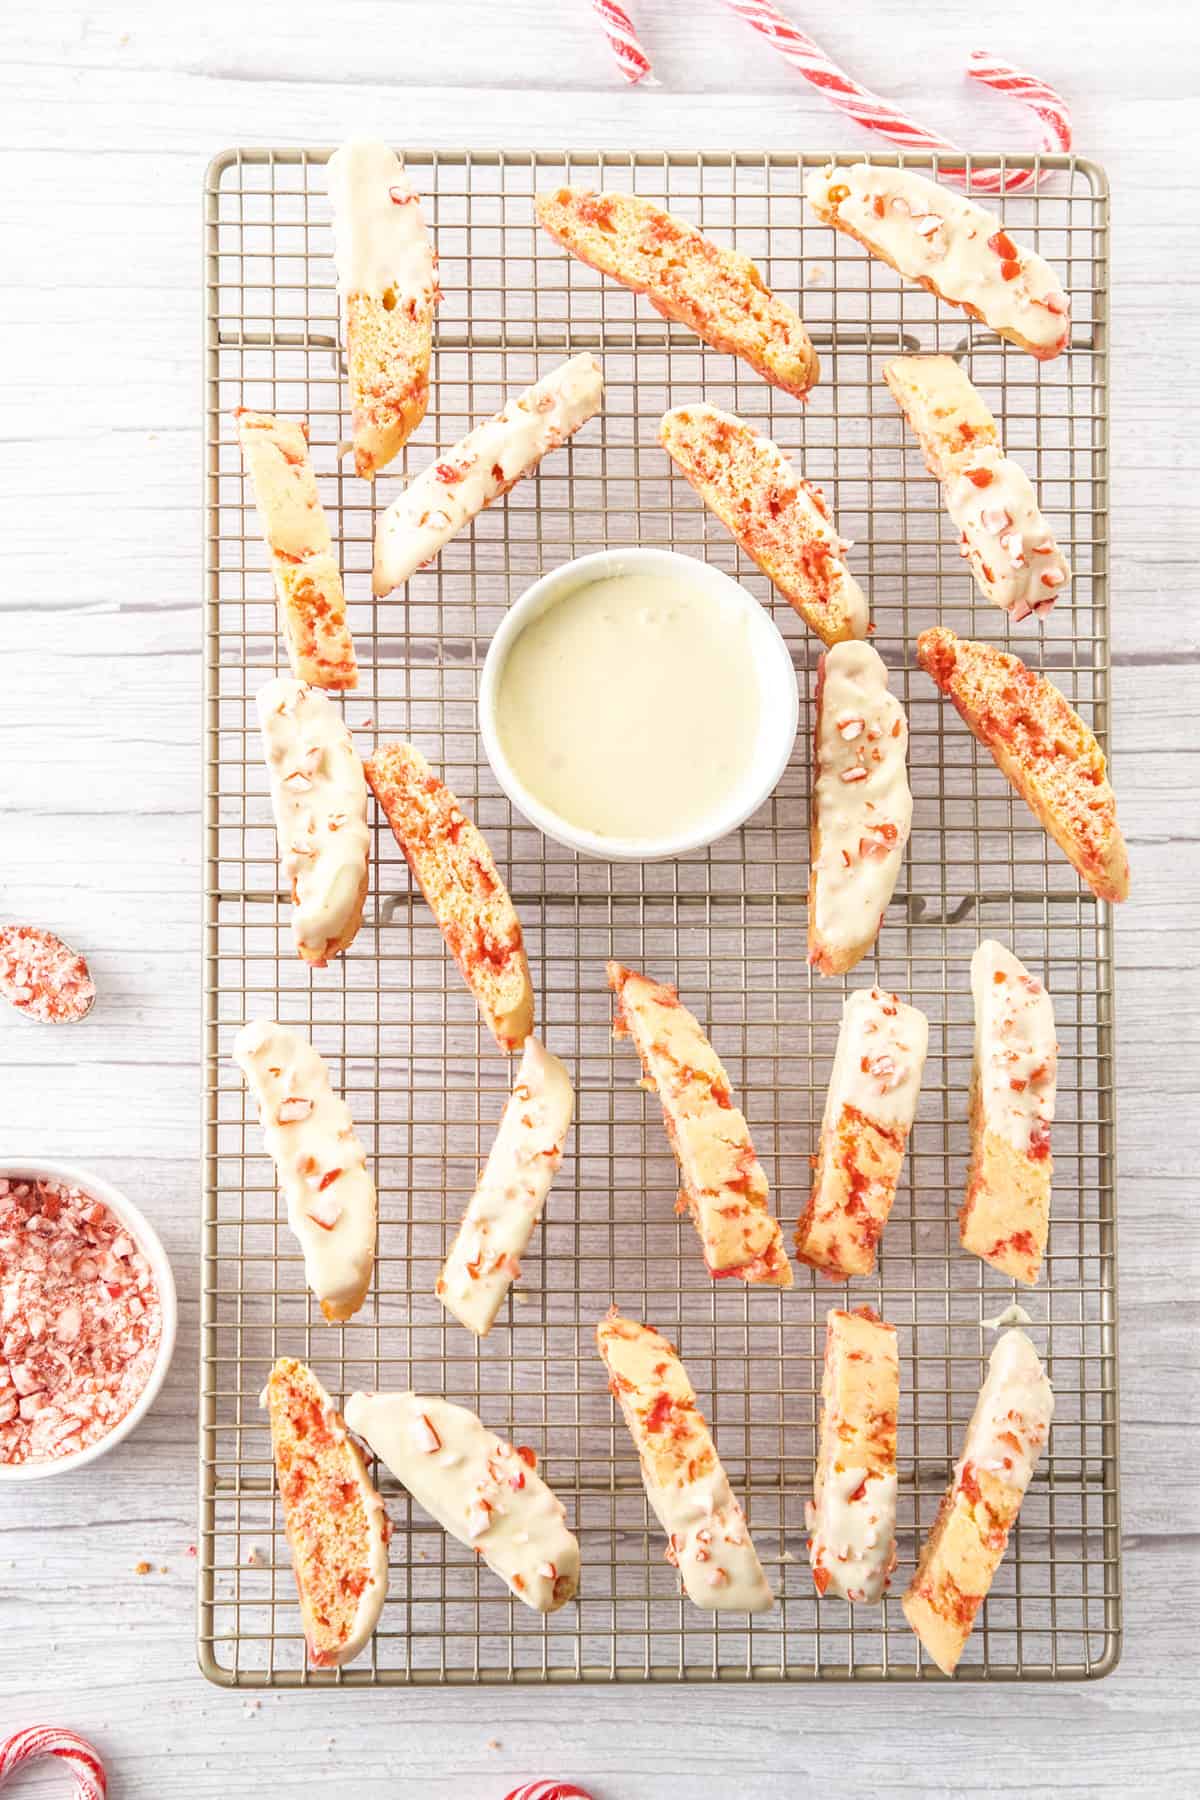 biscotti dipped in white chocolate and sprinkled with candy canes on wire rack